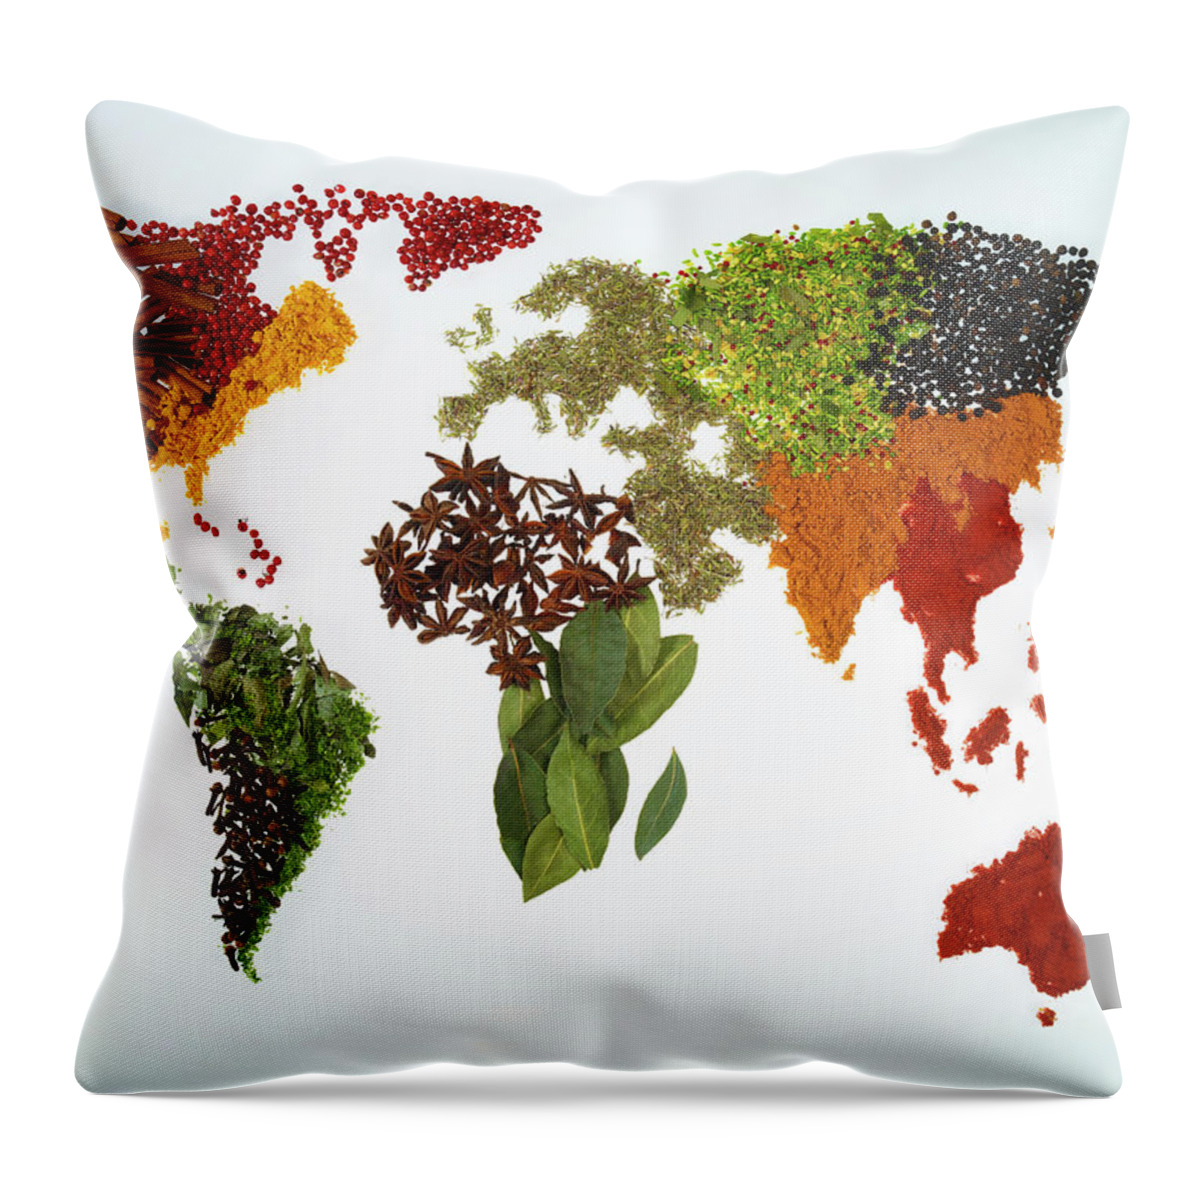 Large Group Of Objects Throw Pillow featuring the photograph World Map With Spices And Herbs by Yamada Taro